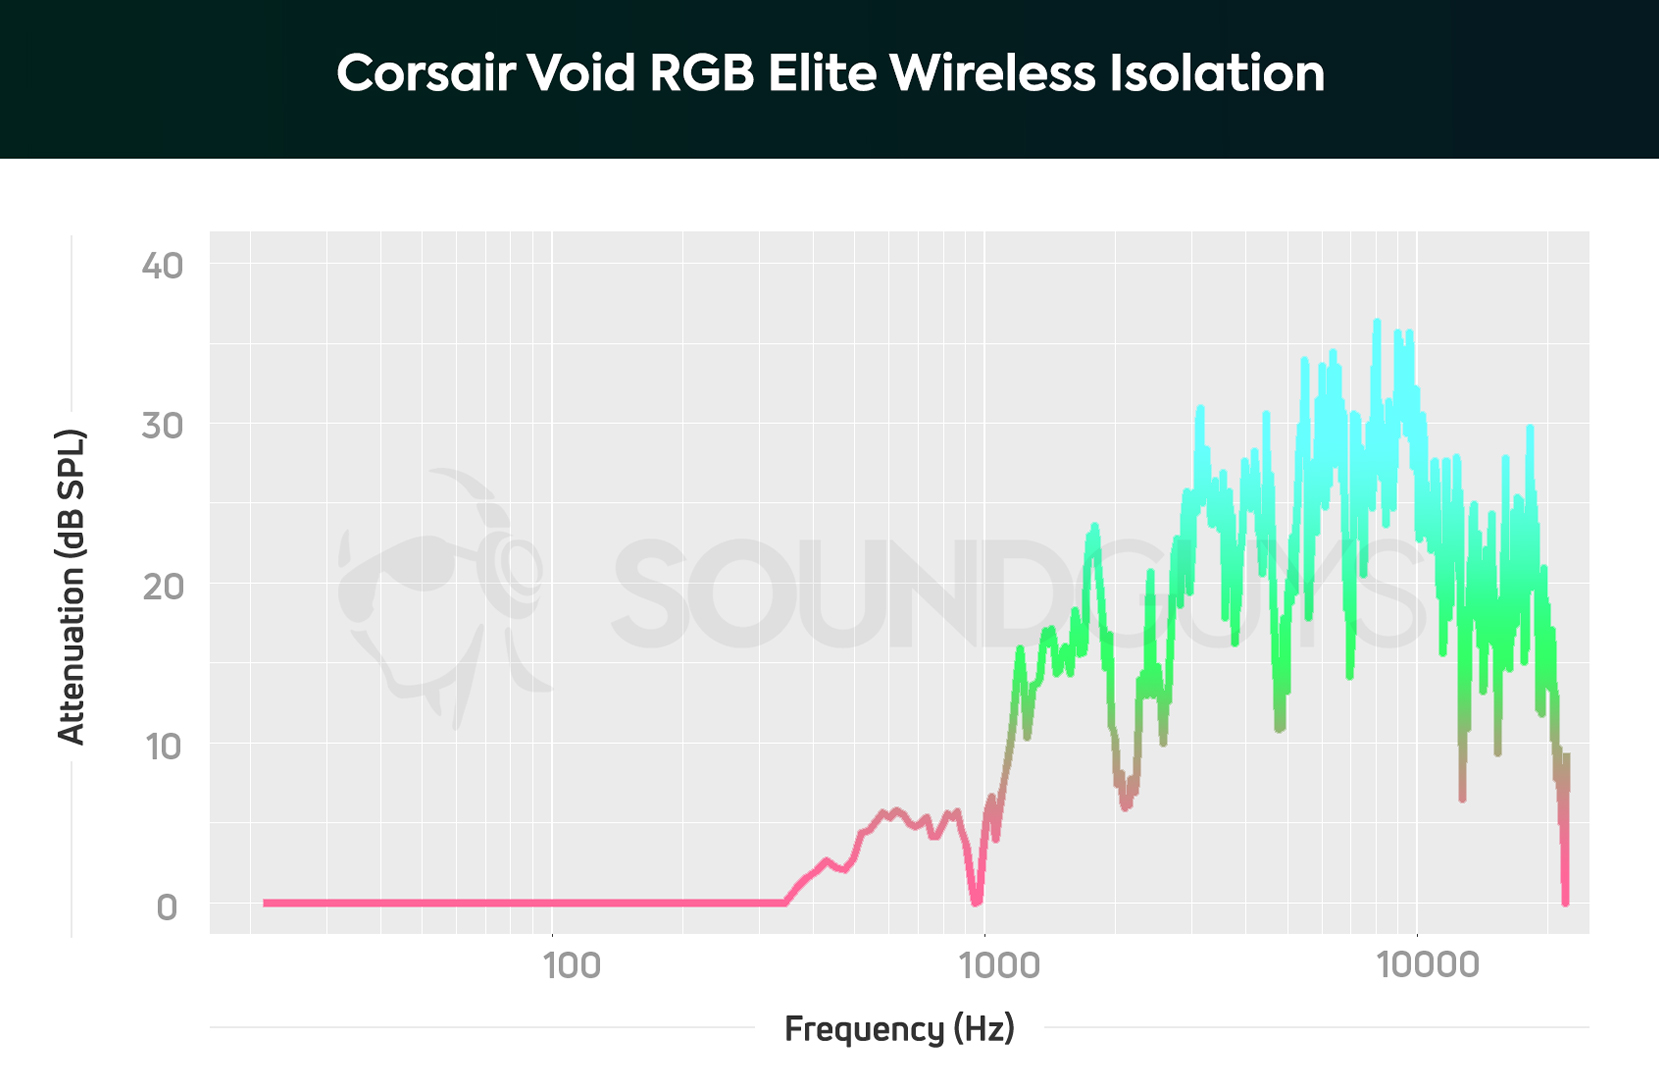 A sound isolation chart for the Corsair Void RGB Elite Wireless gaming headset